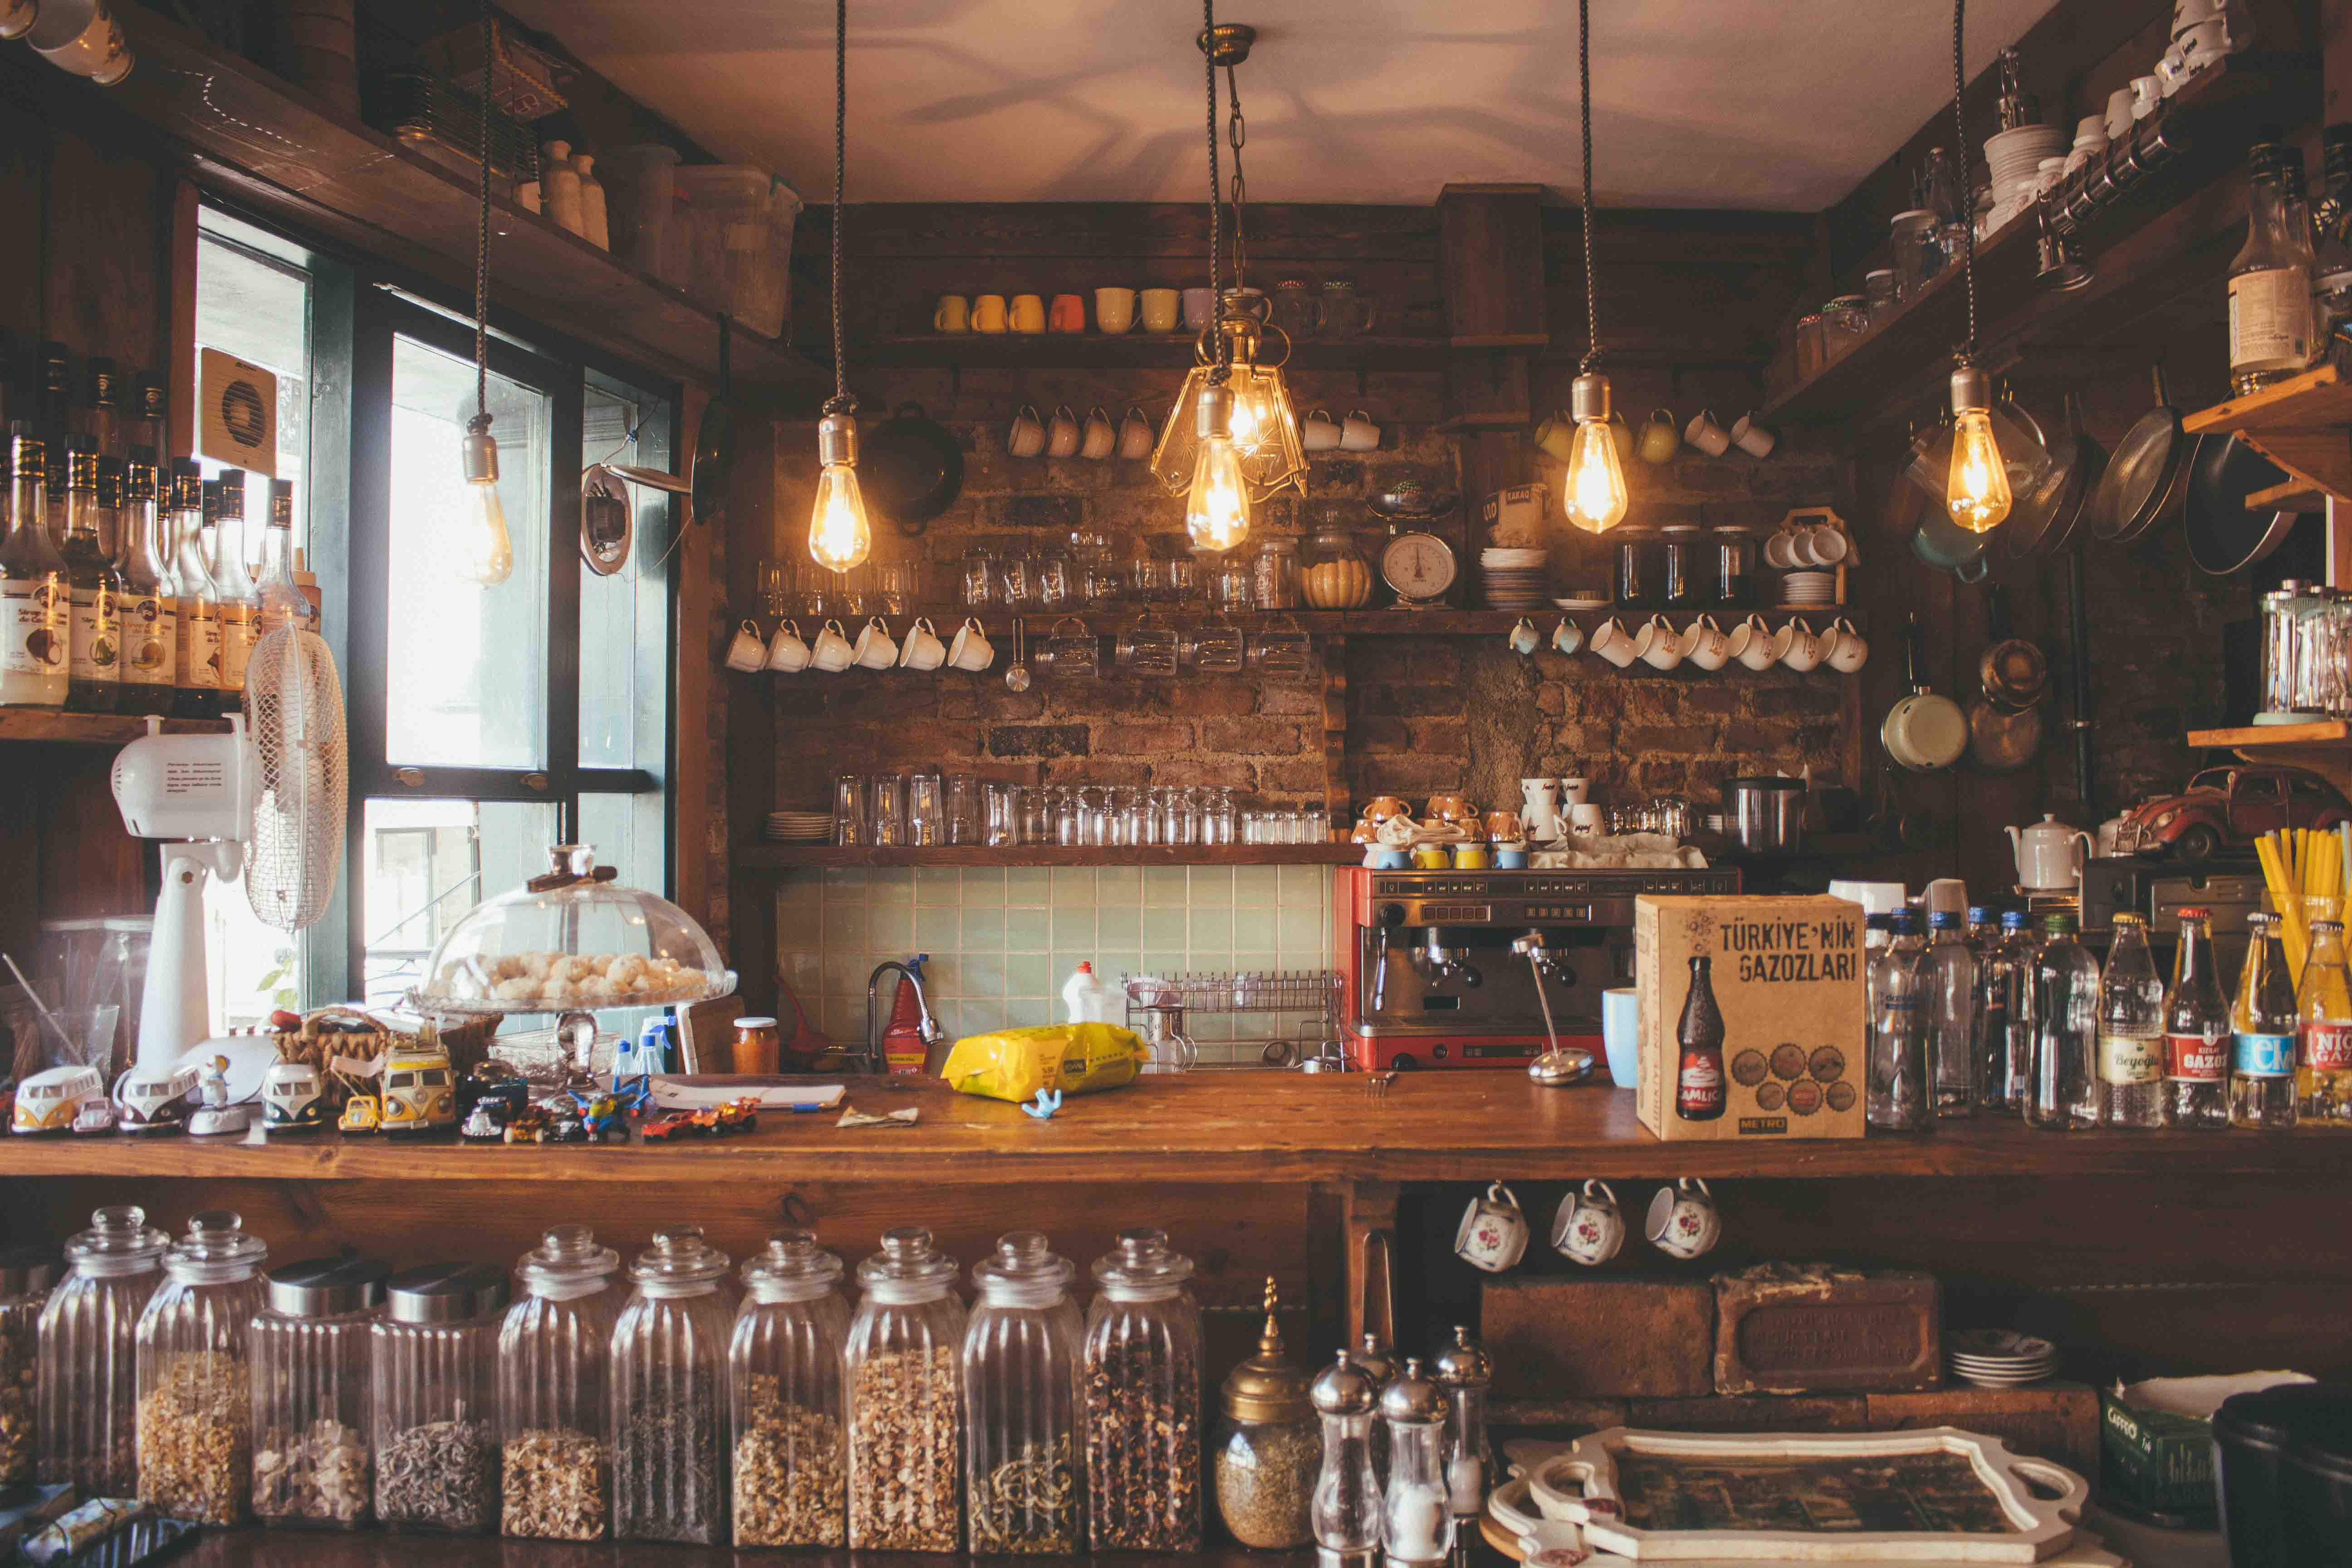 A coffee shop bar with spices, baked goods, and syrups on the counter